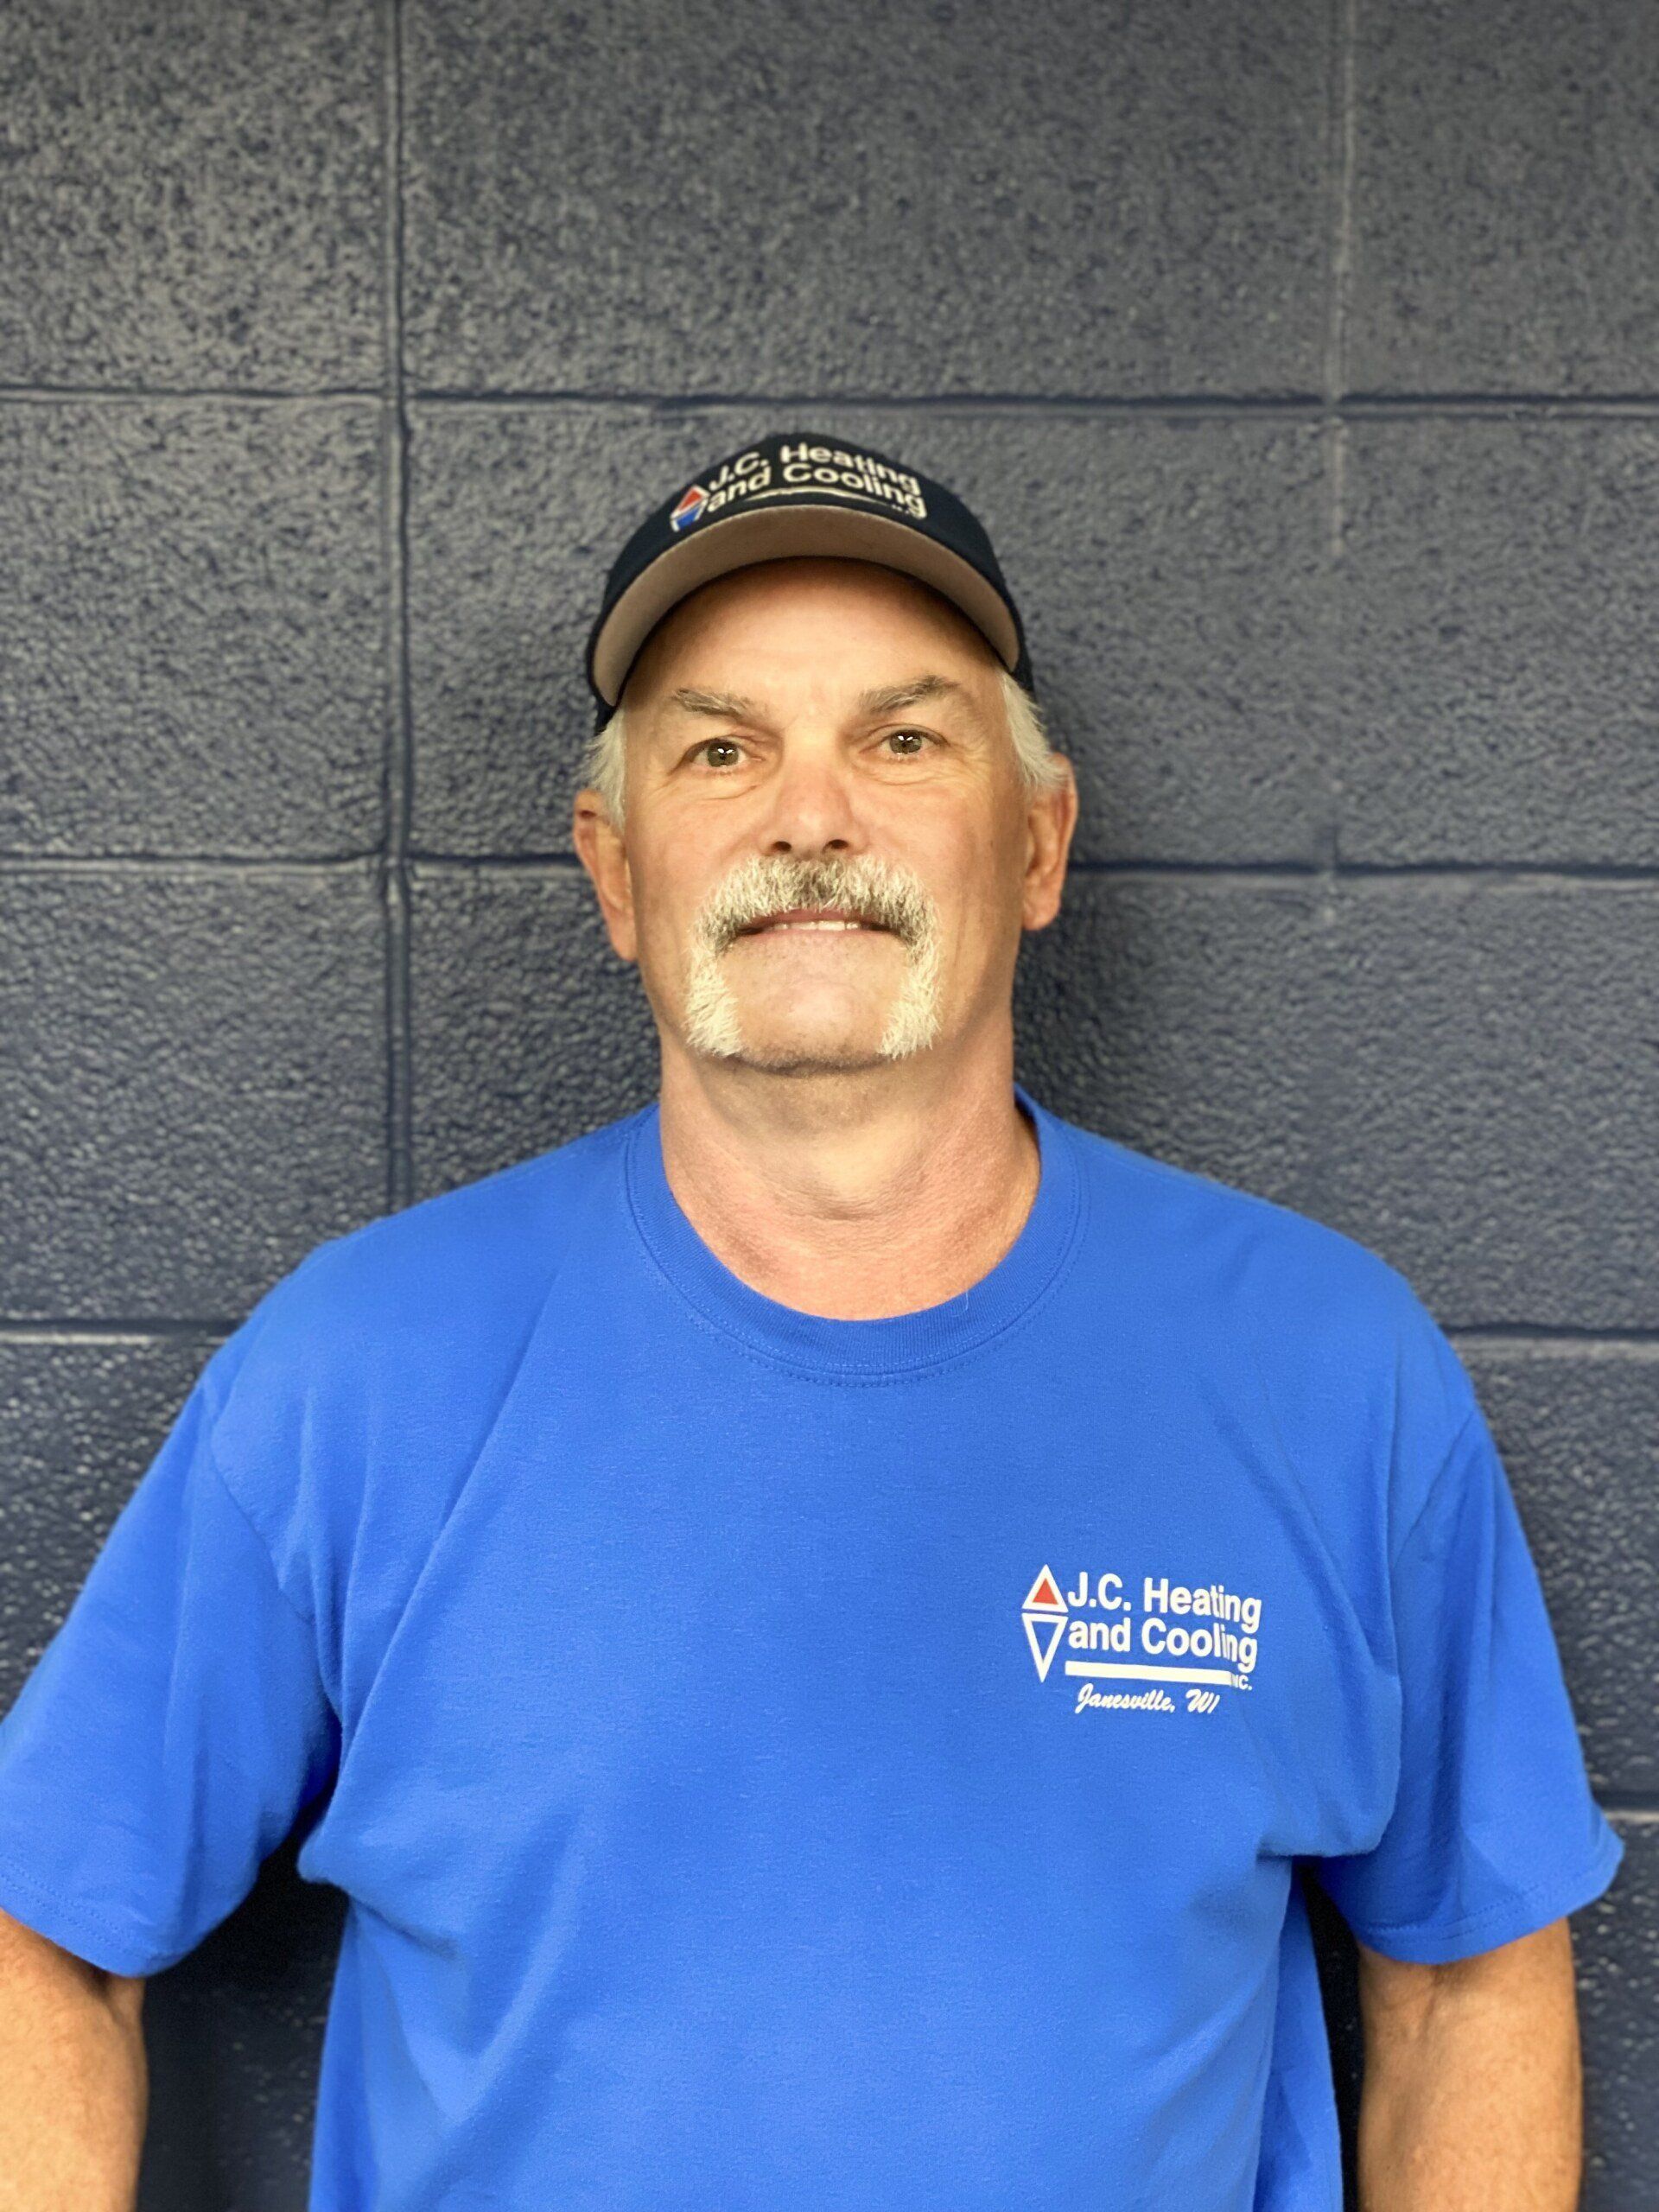 Mike — Janesville, WI — J.C. Heating and Cooling, Inc.